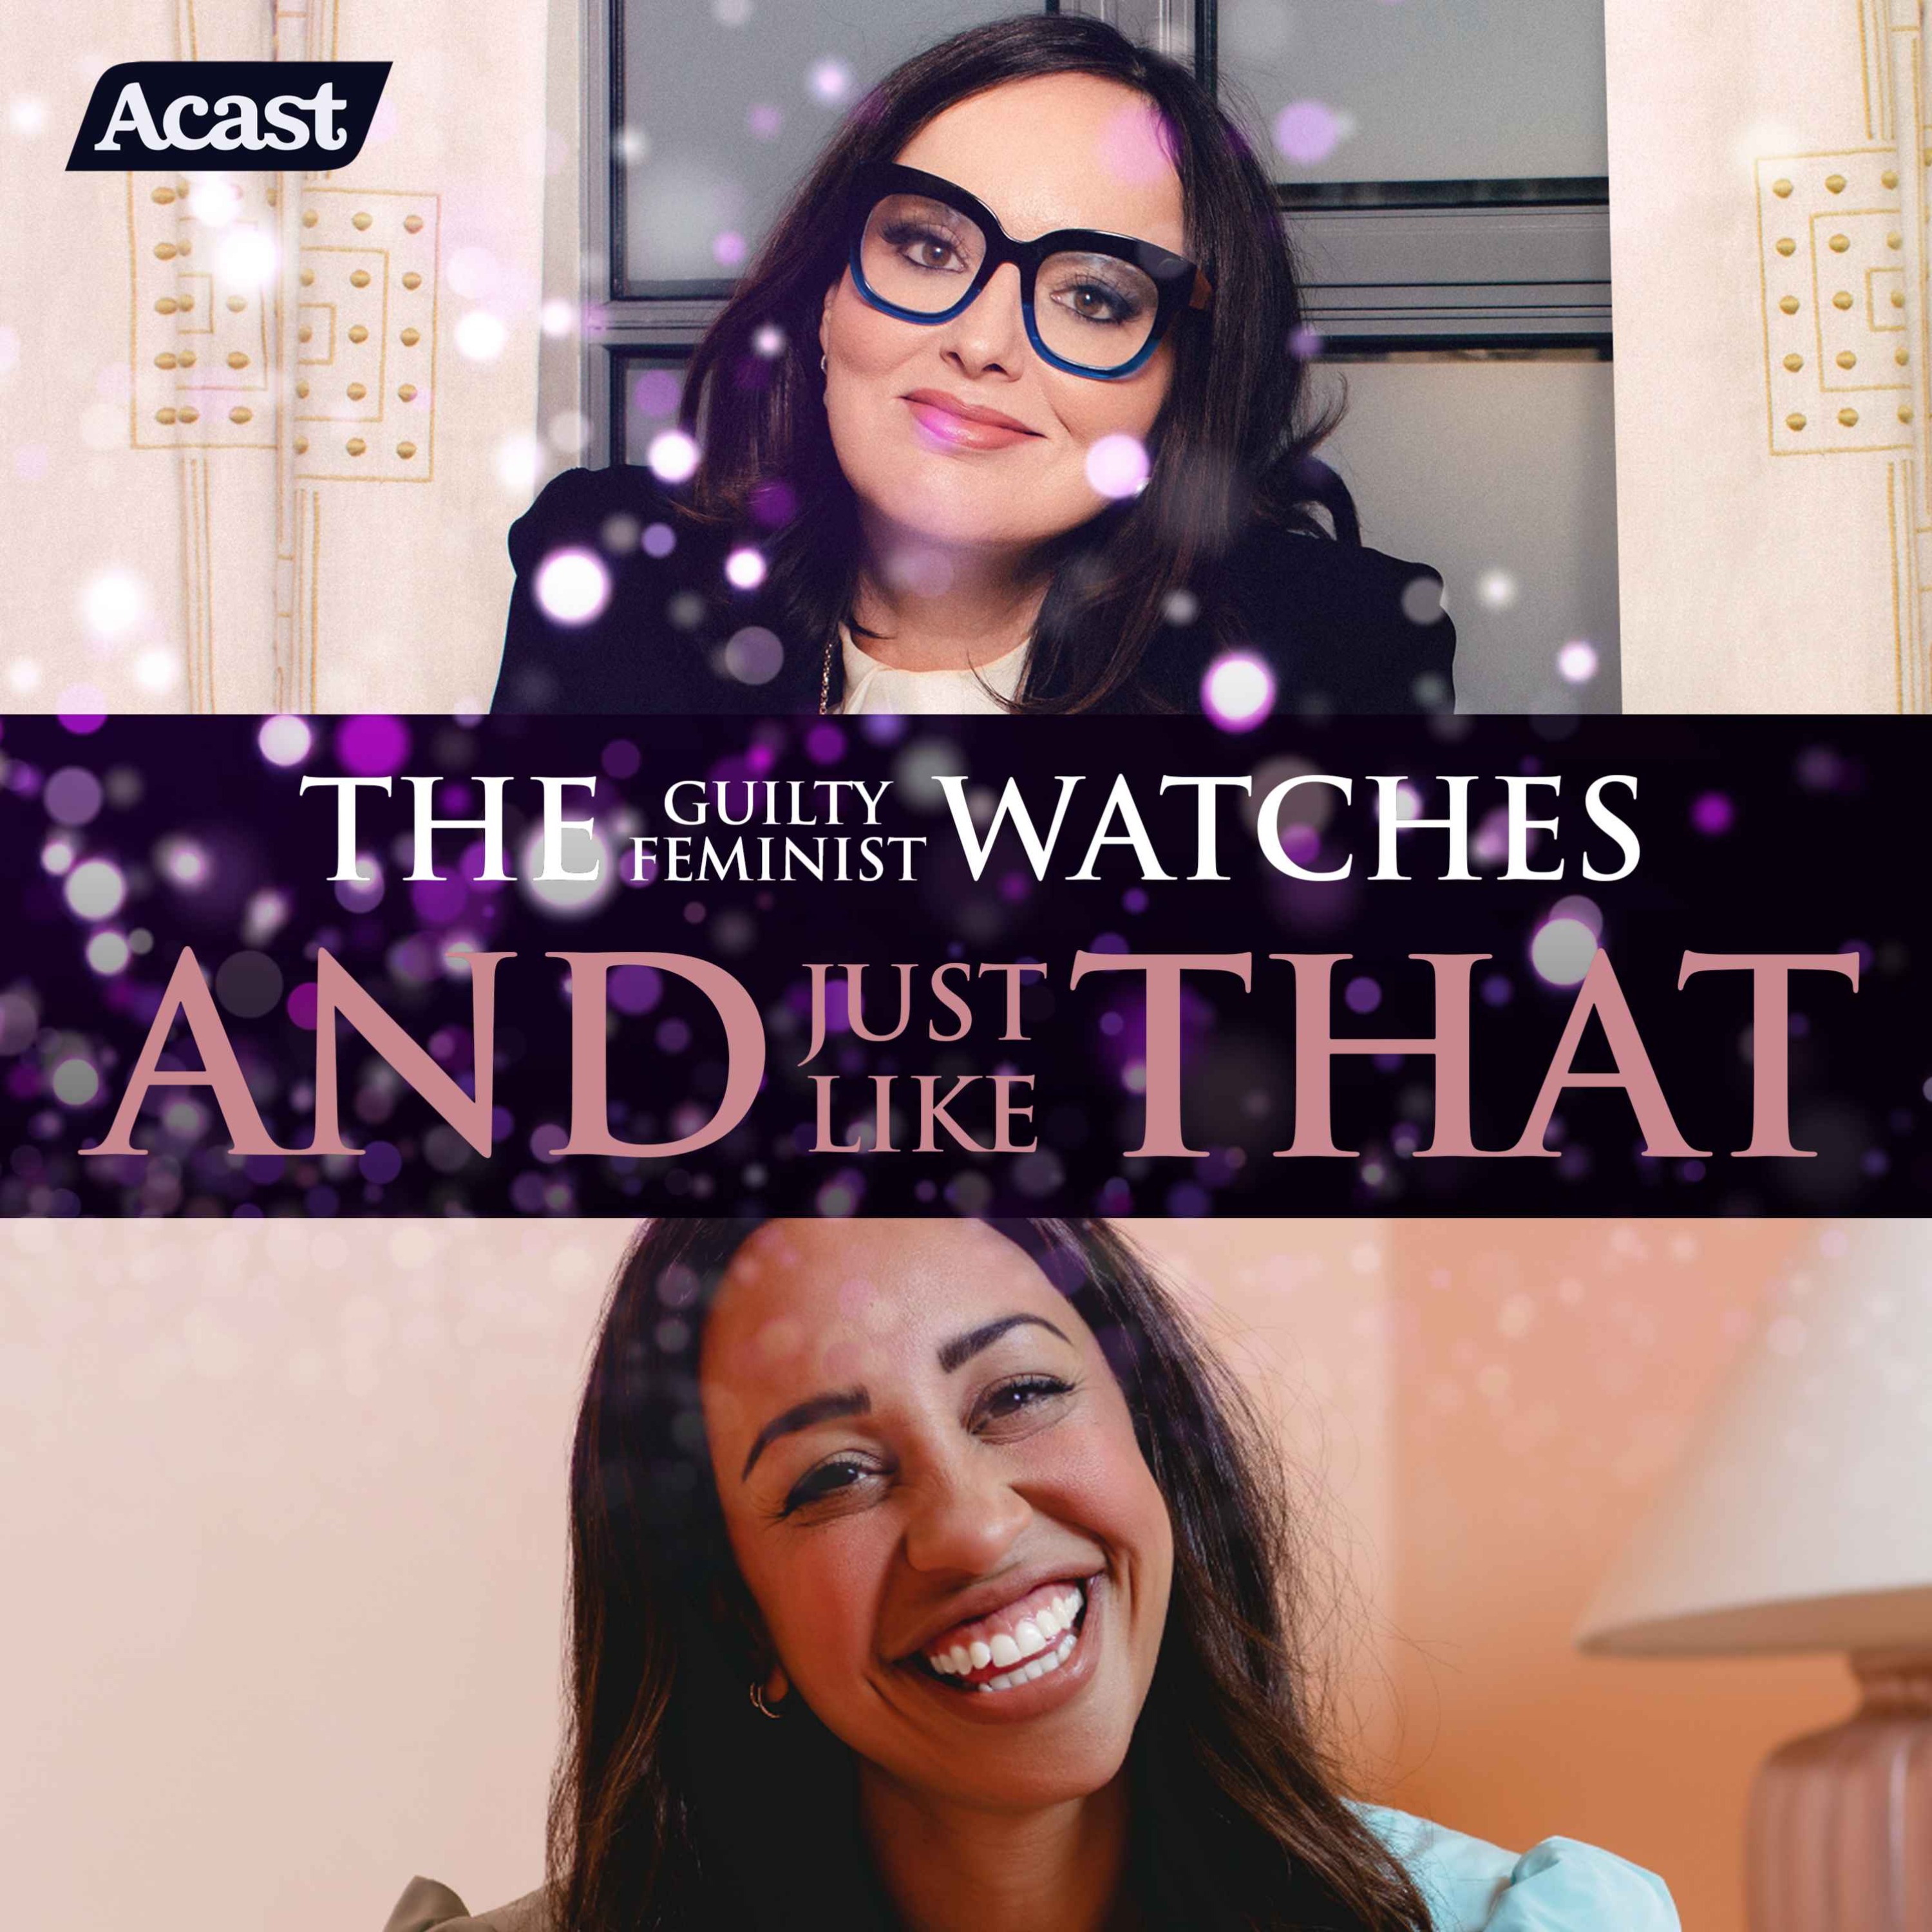 The Guilty Feminist watches And Just Like That - Episode 7 with Naomi Evans